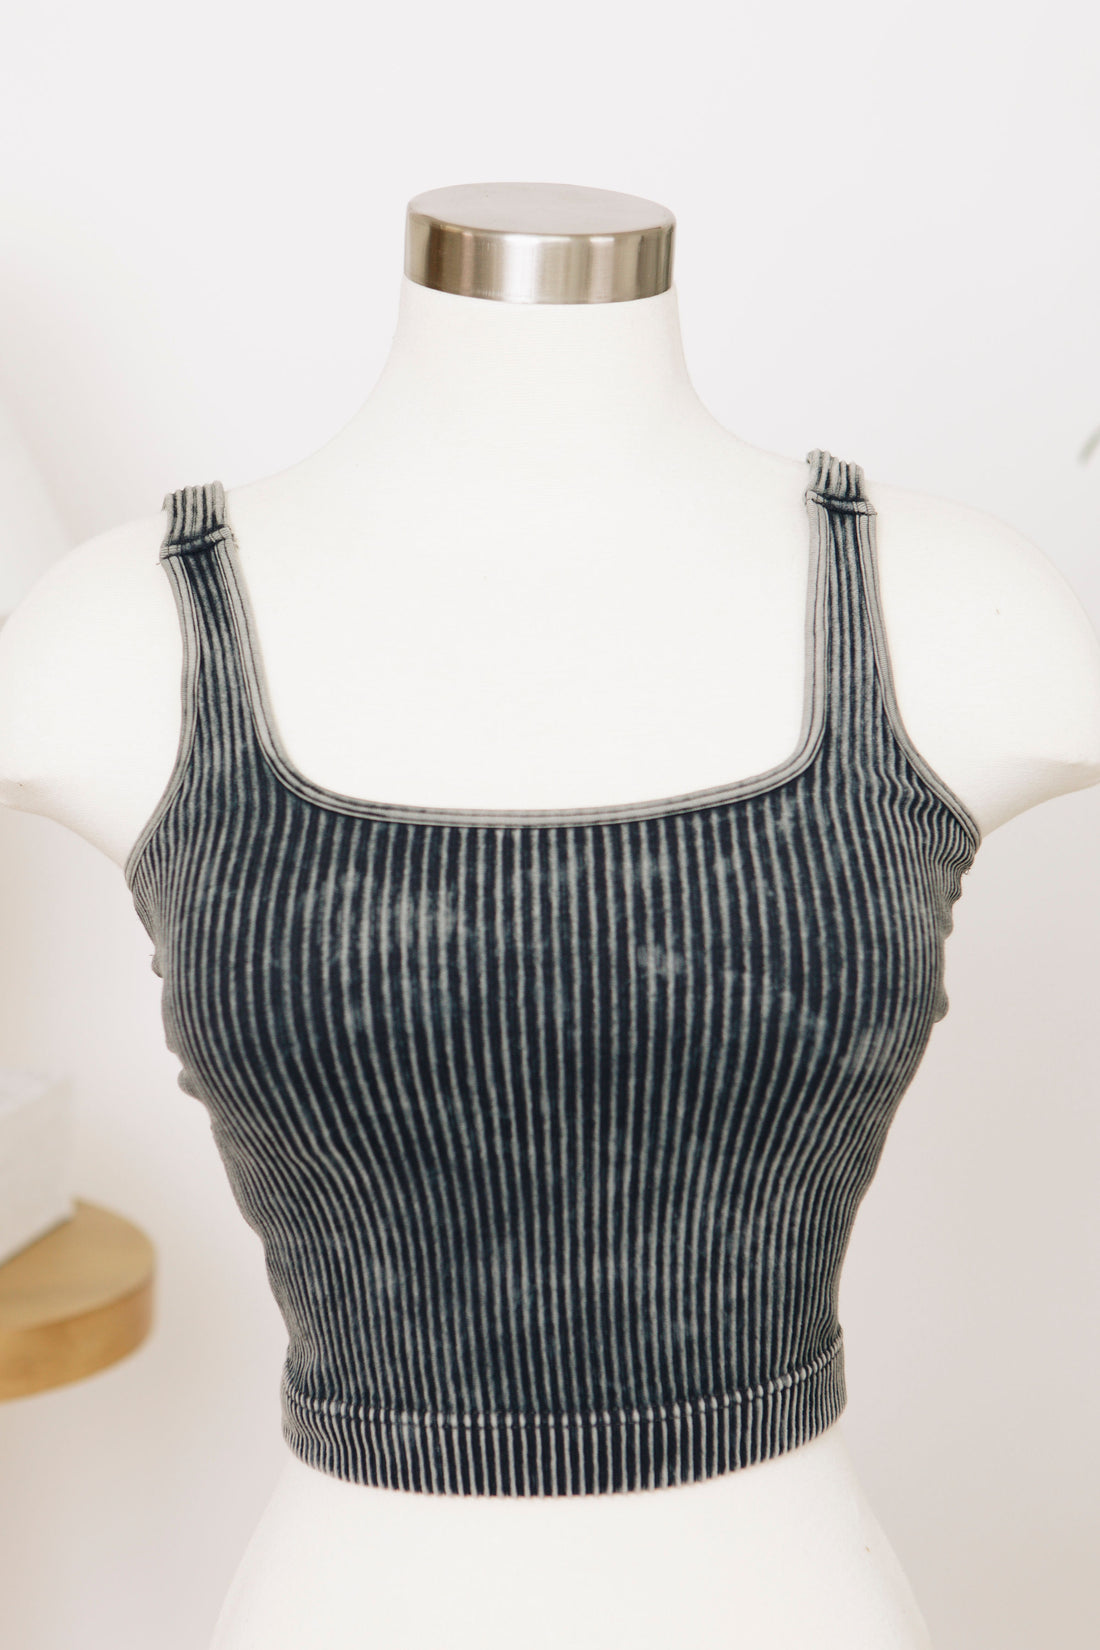 RESTOCKED - Doorbuster - Washed Ribbed Padded Tank Top (S-XL)